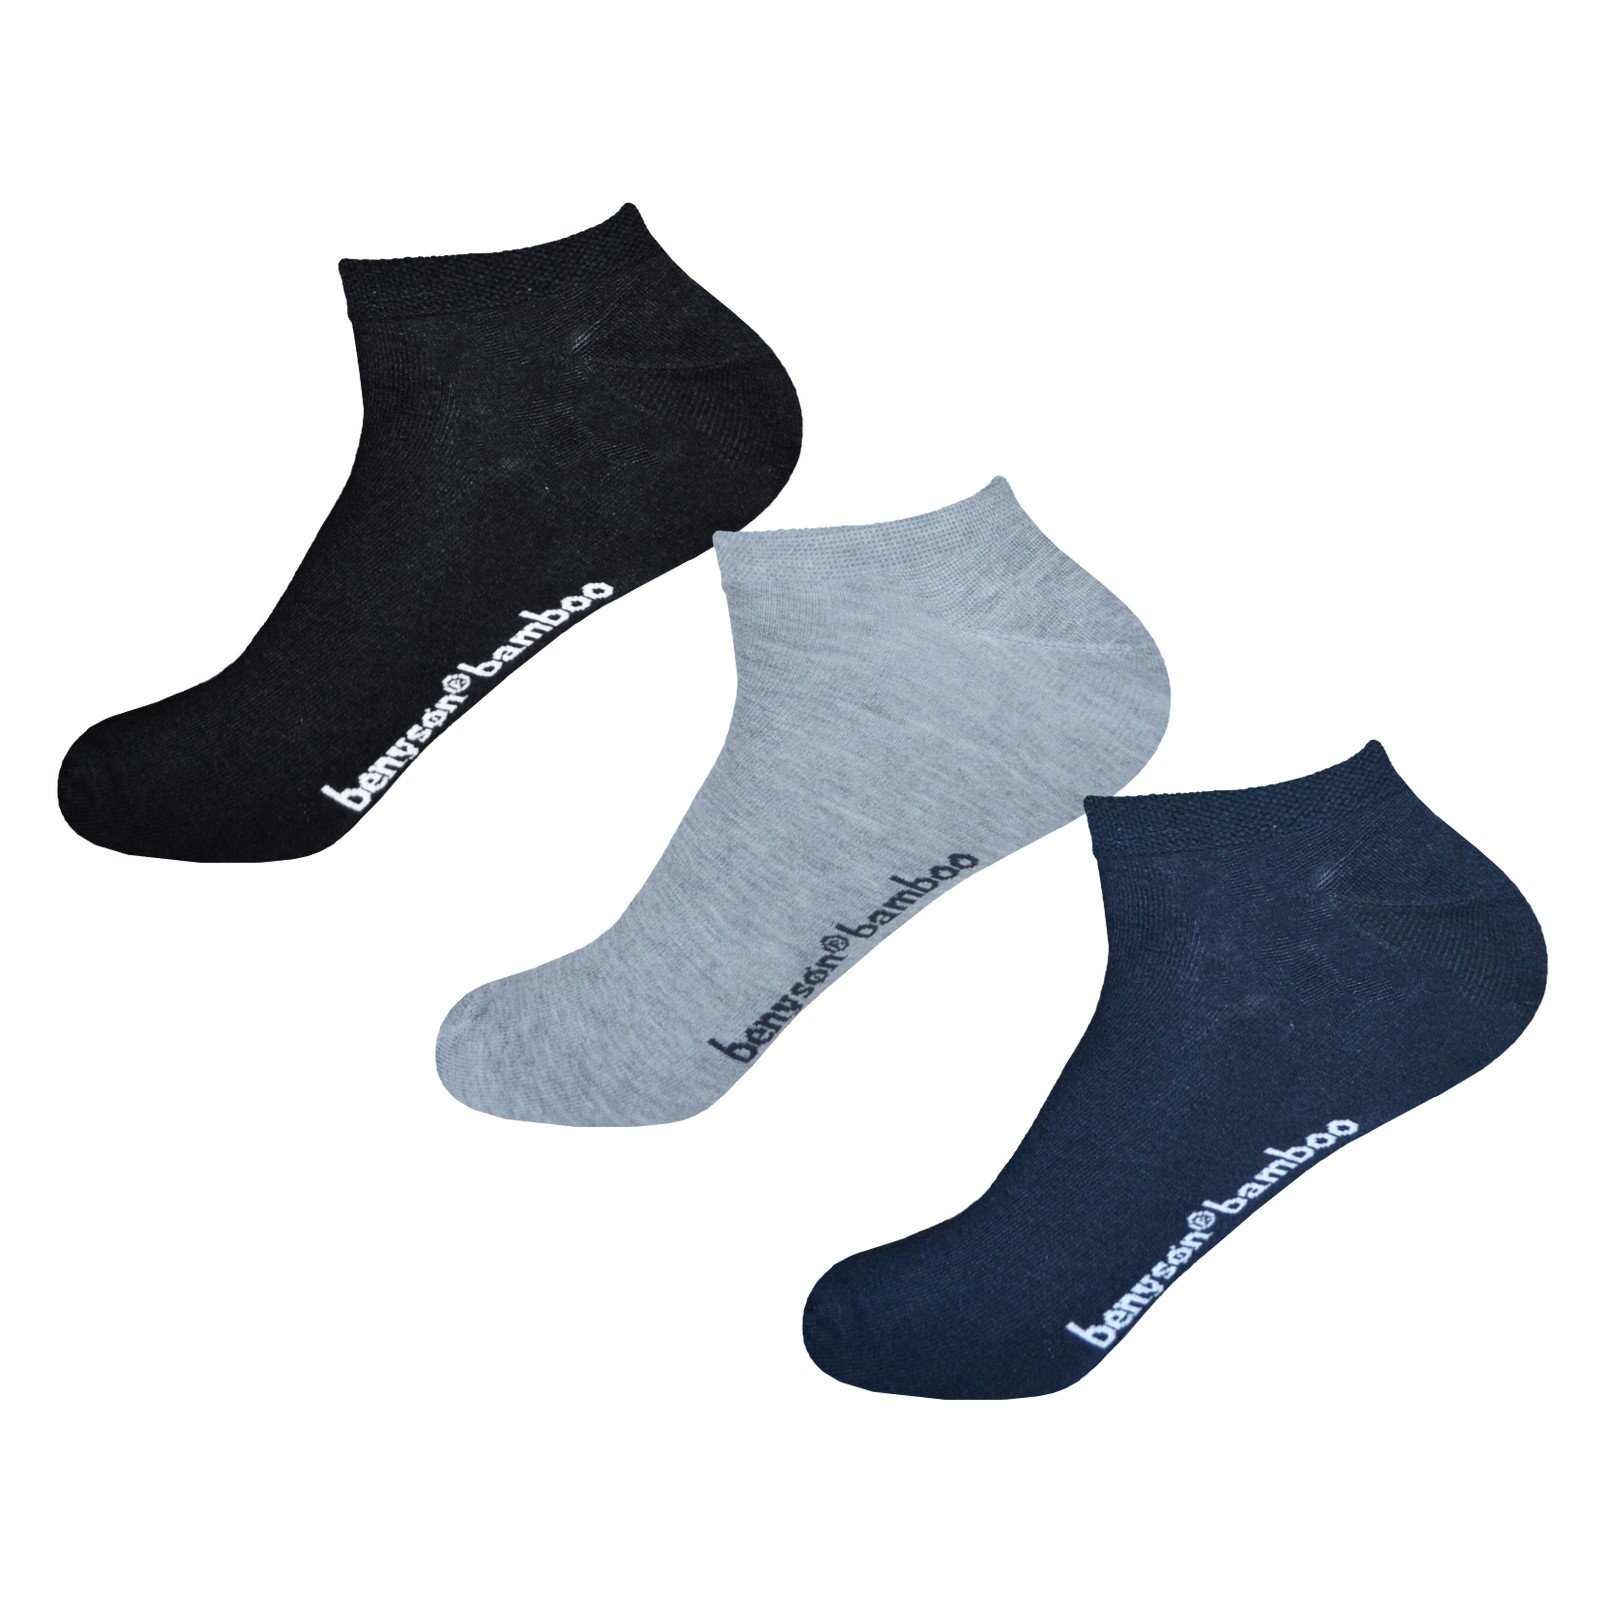 3PACK socks Benysøn low bamboo multicolored